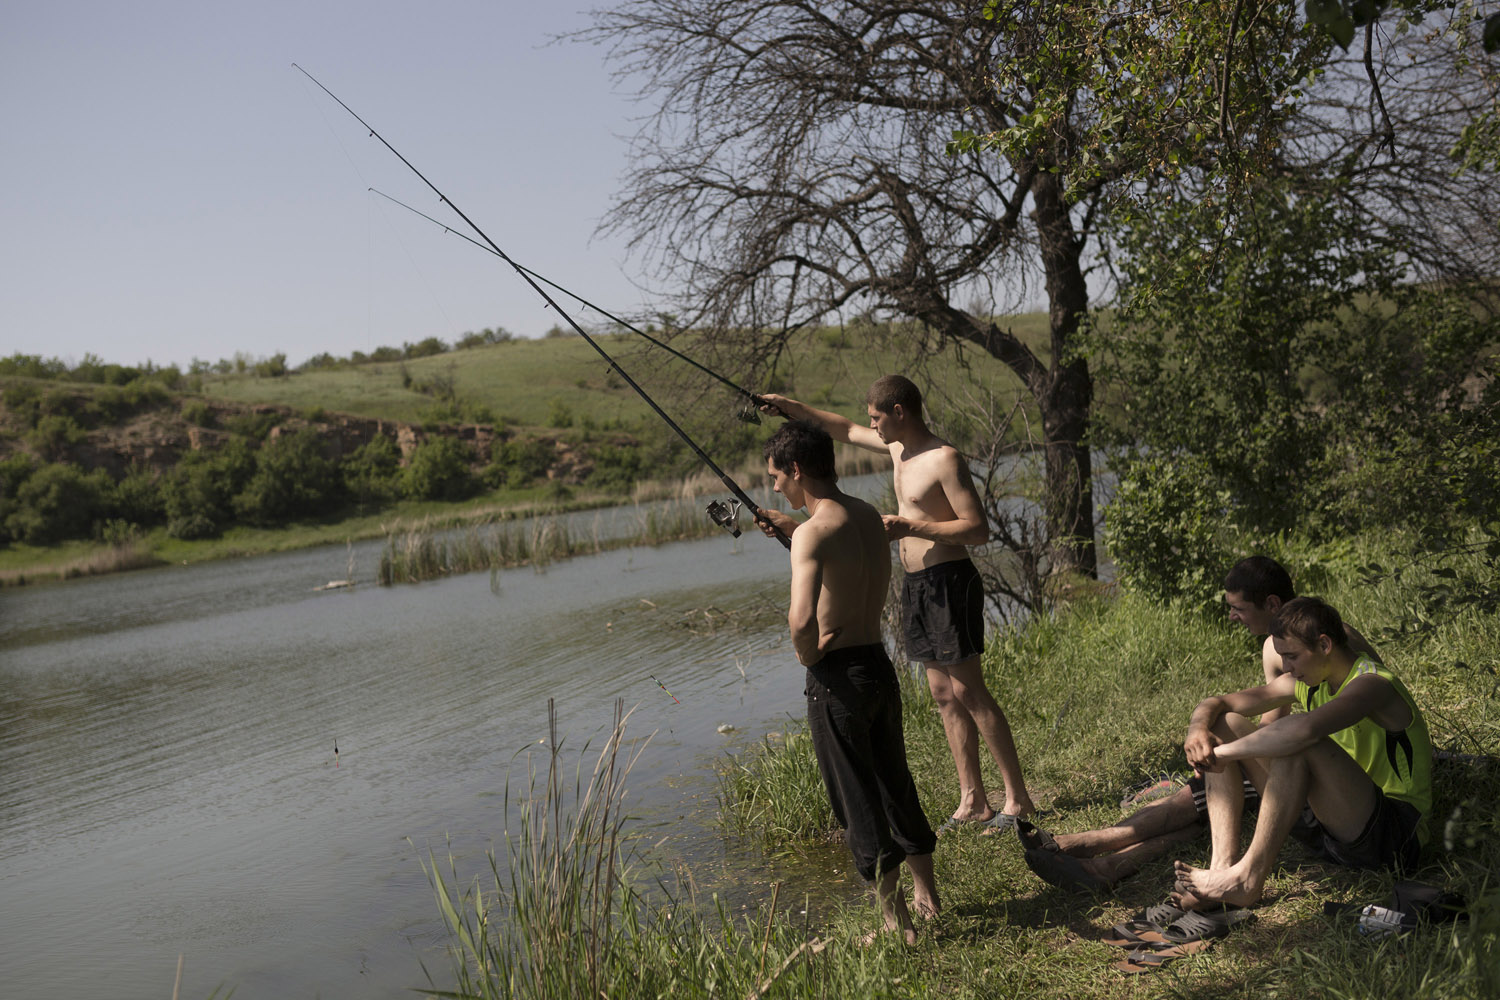 Tolek (21) and Marek (18) fishing with their friends near Davidovka. Fishing is the main hobby among miners, a much-needed relaxing activity after the stress of working underground, where every small noise might be the beginning of a deadly cave-in or of an explosion.